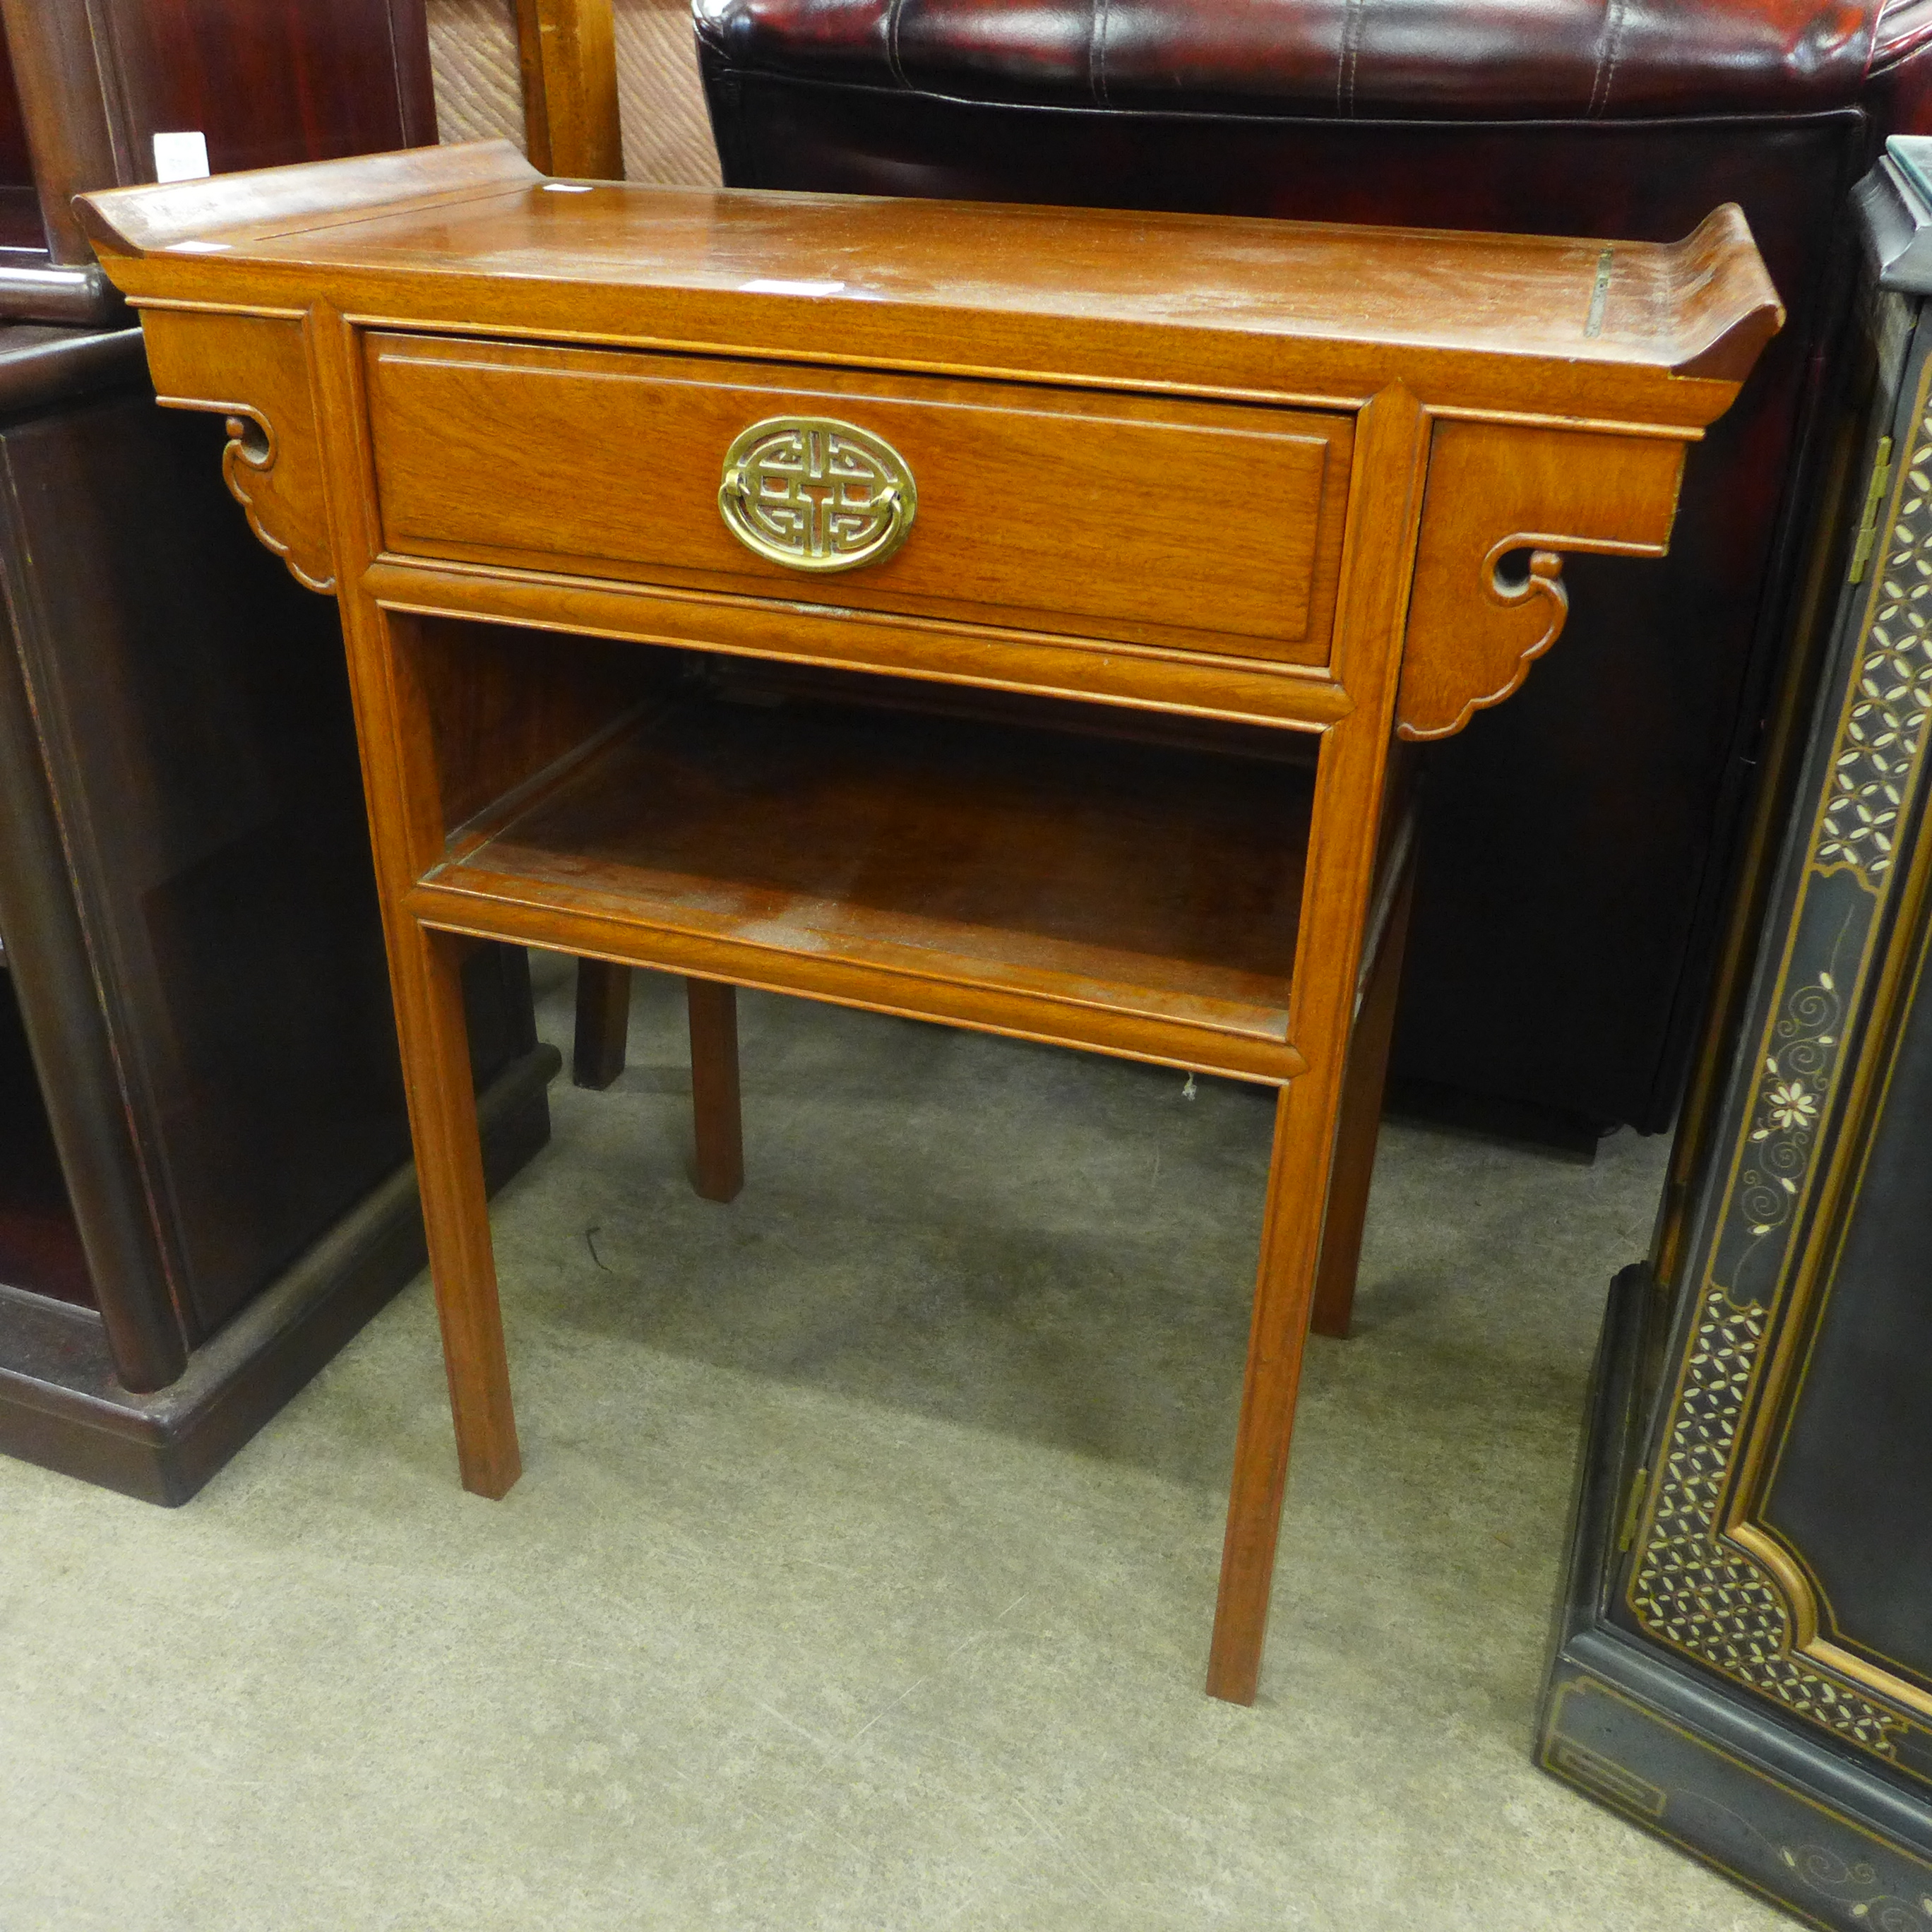 A small Chinese hardwood single drawer console table